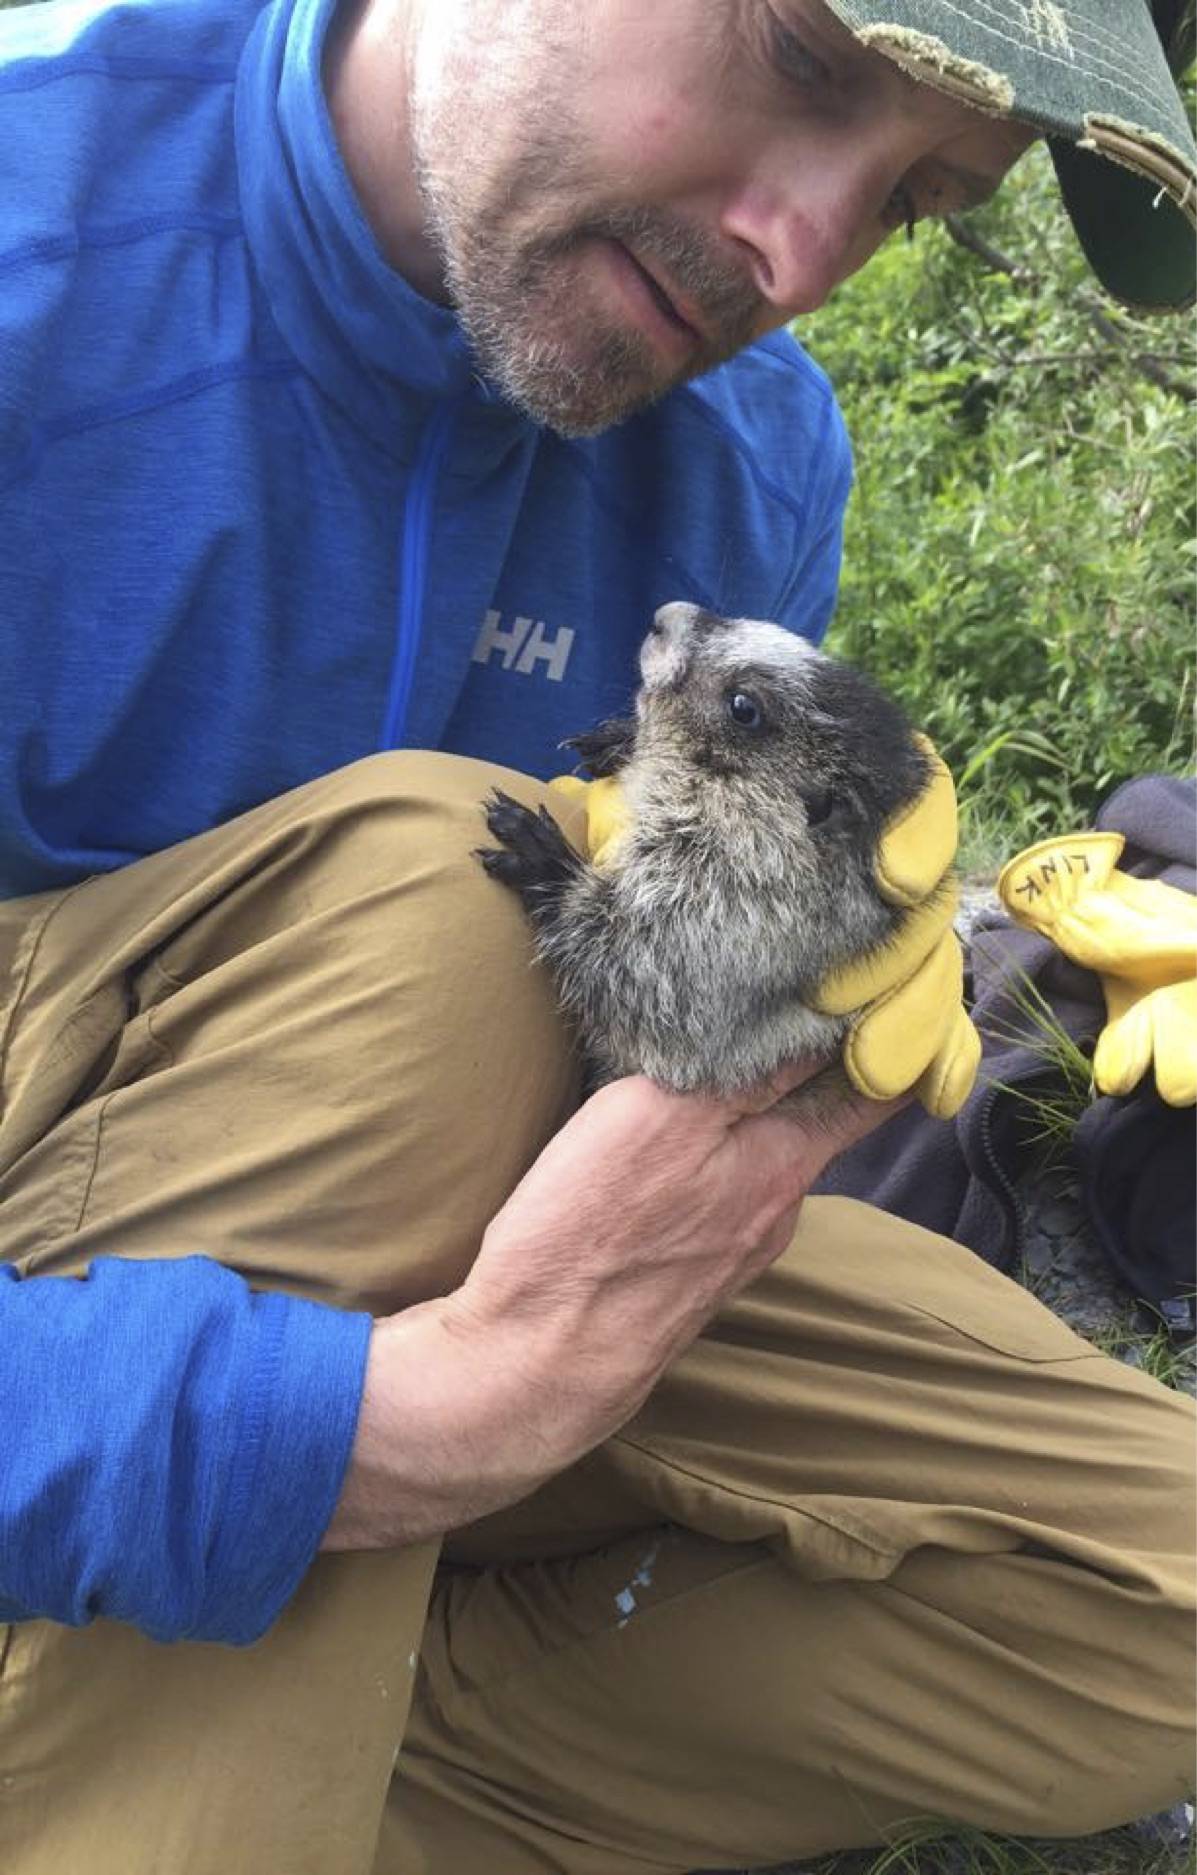 Courtesy photo | Kyndall Hildebrandt University of Alaska professor and UA Museum of the North curator Dr. Link Olson works with a baby marmot during a scientific study.